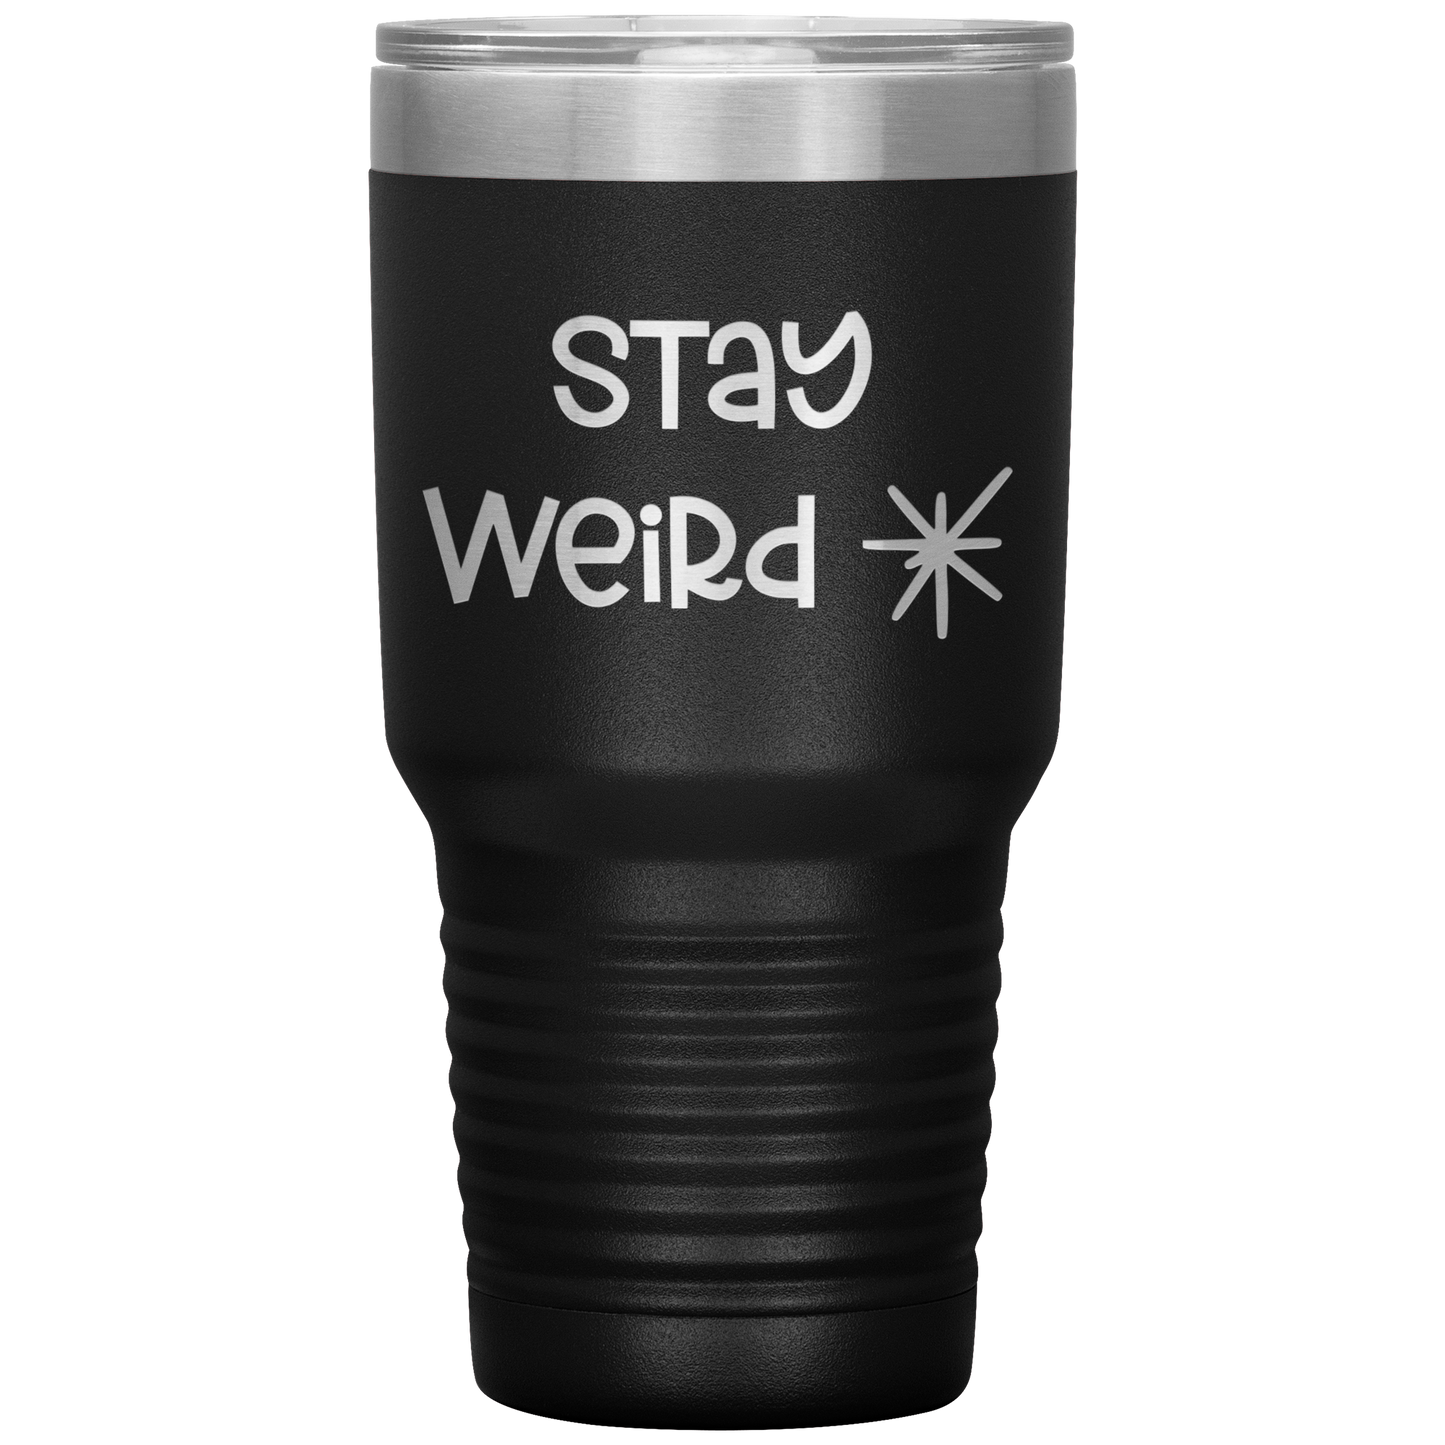 "Stay Weird" 30 oz. Insulated Stainless Steel Insulated Travel Coffee Cup with Lid